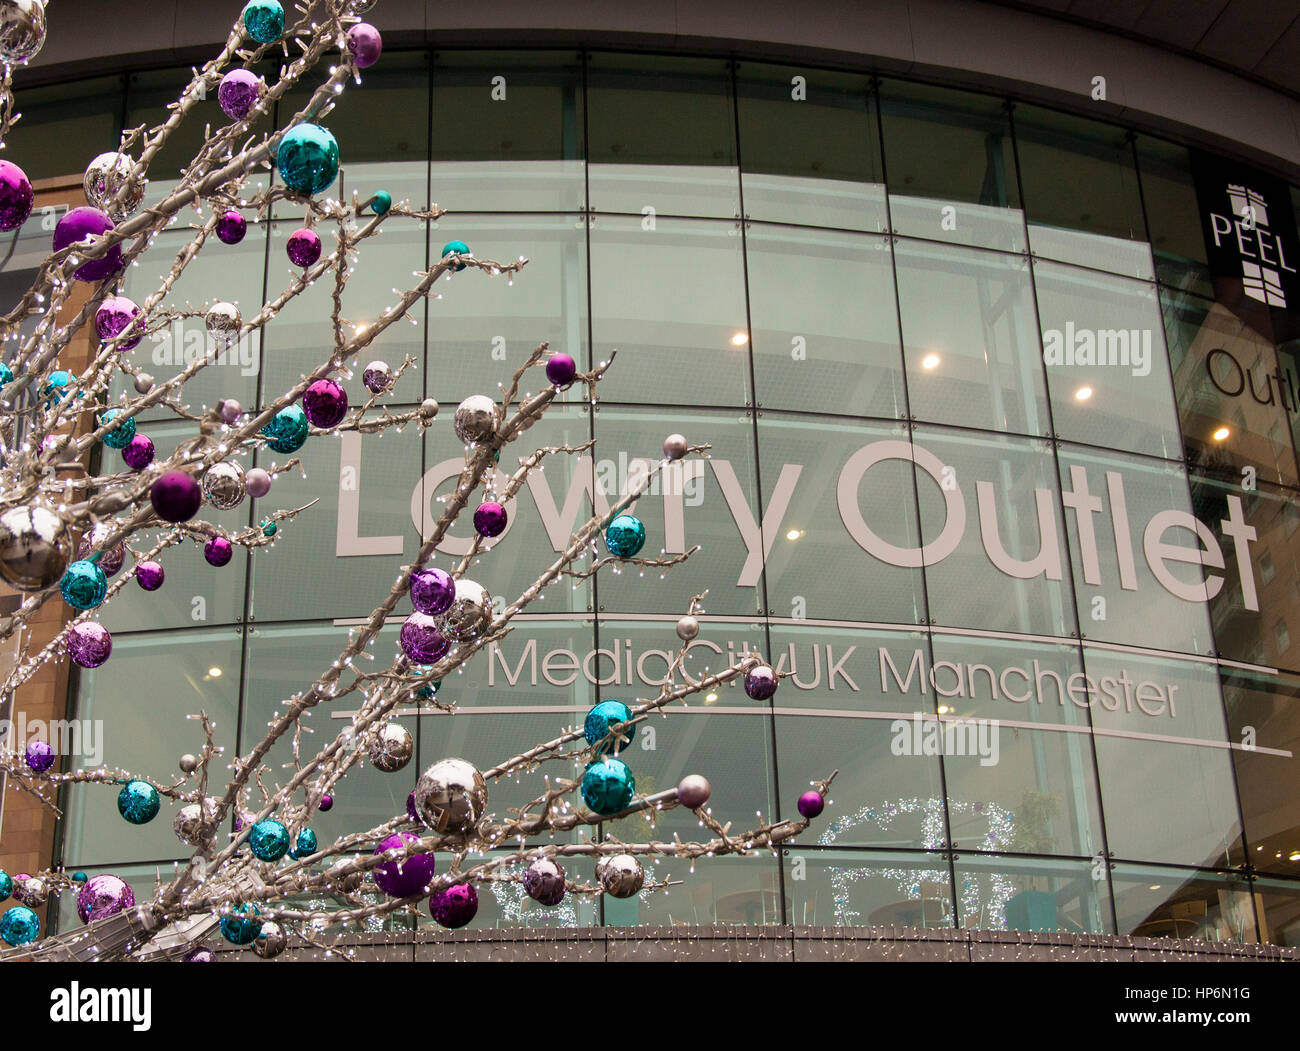 Lowry Outlet at Christmas Stock Photo